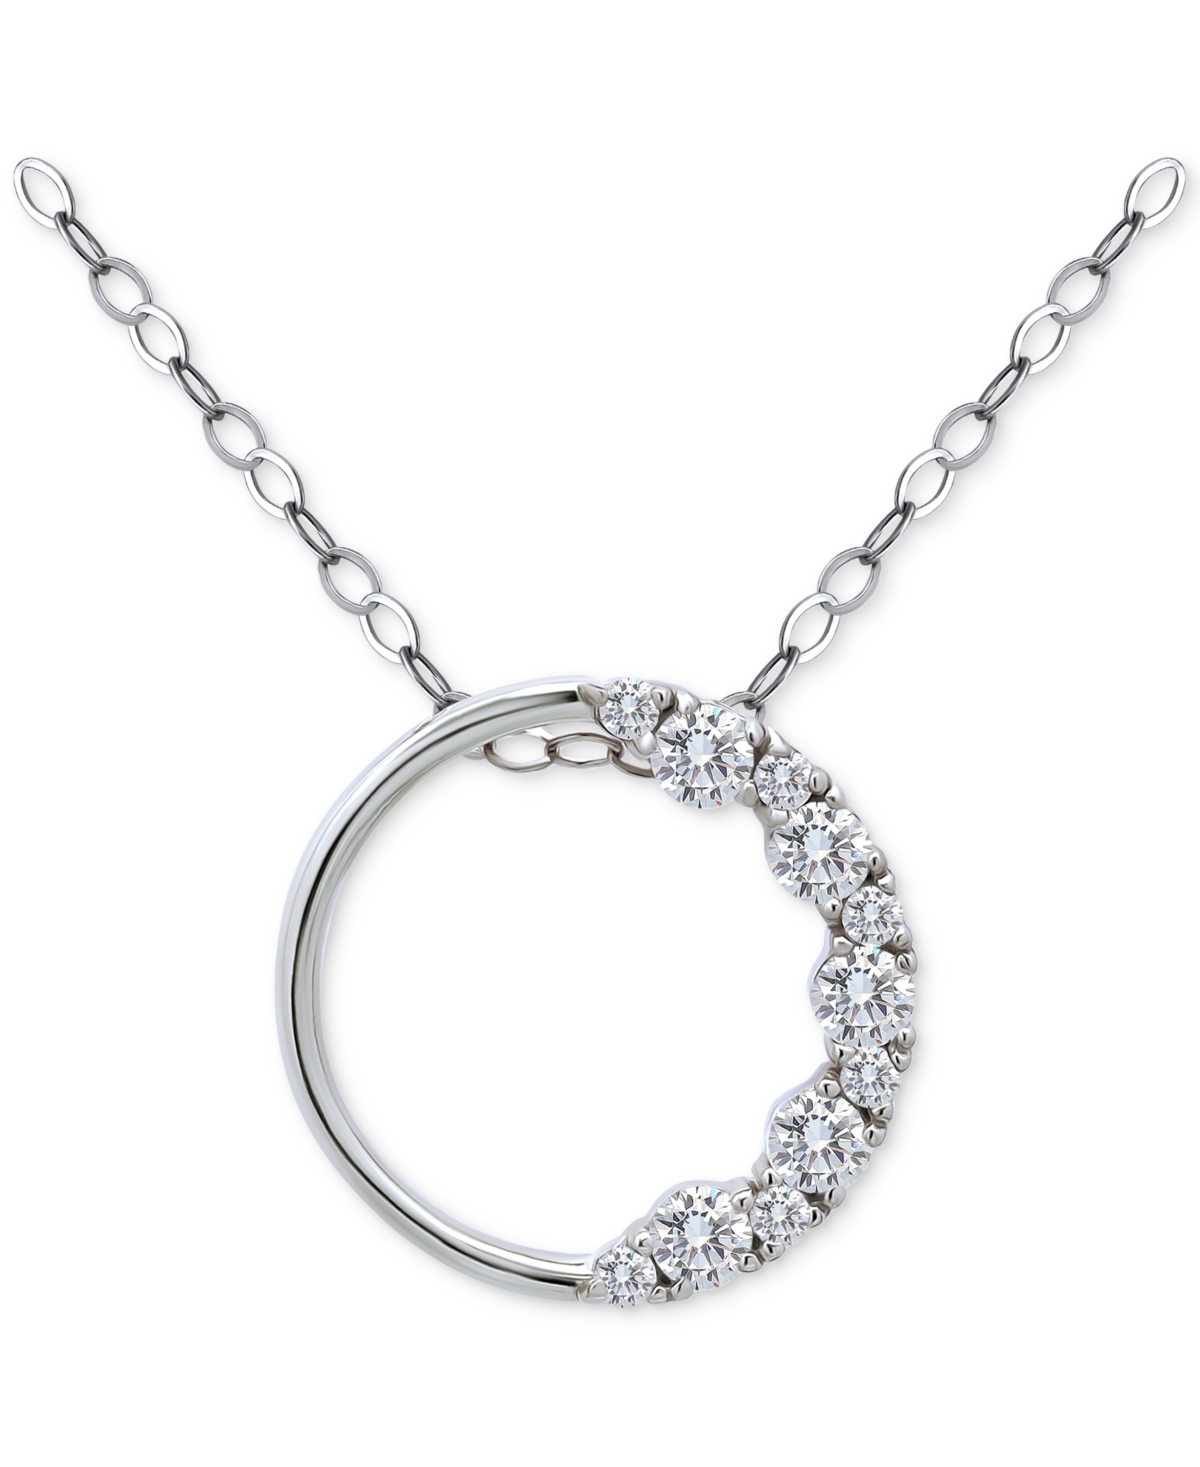 Giani Bernini Cubic Zirconia Circle Pendant Necklace In Sterling Silver, 16" + 2" Extender, Created For Macy's